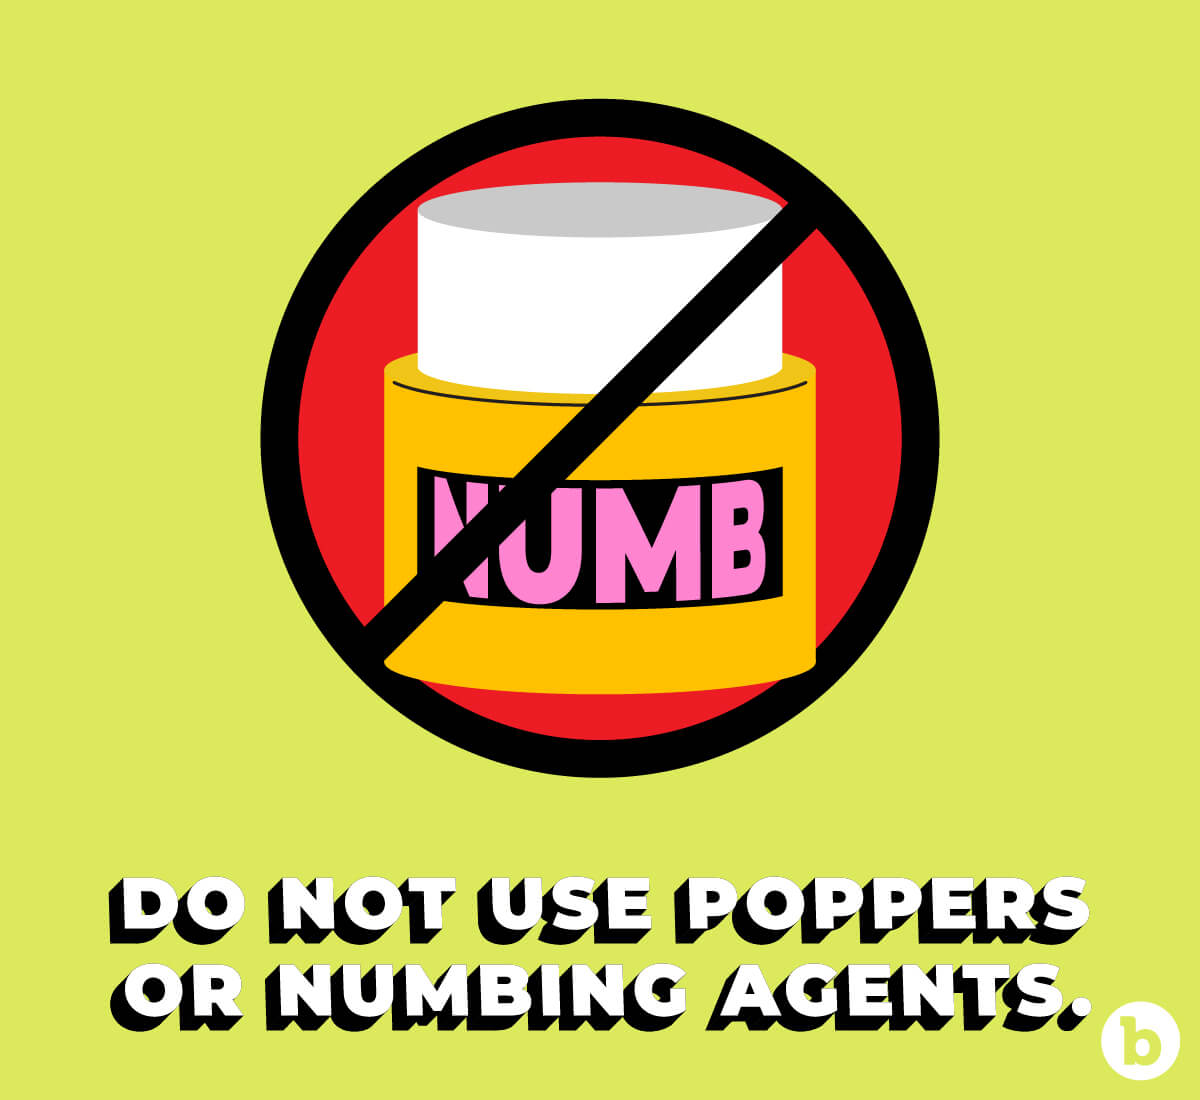 Avoid using poppers and numbing agents during anal sex